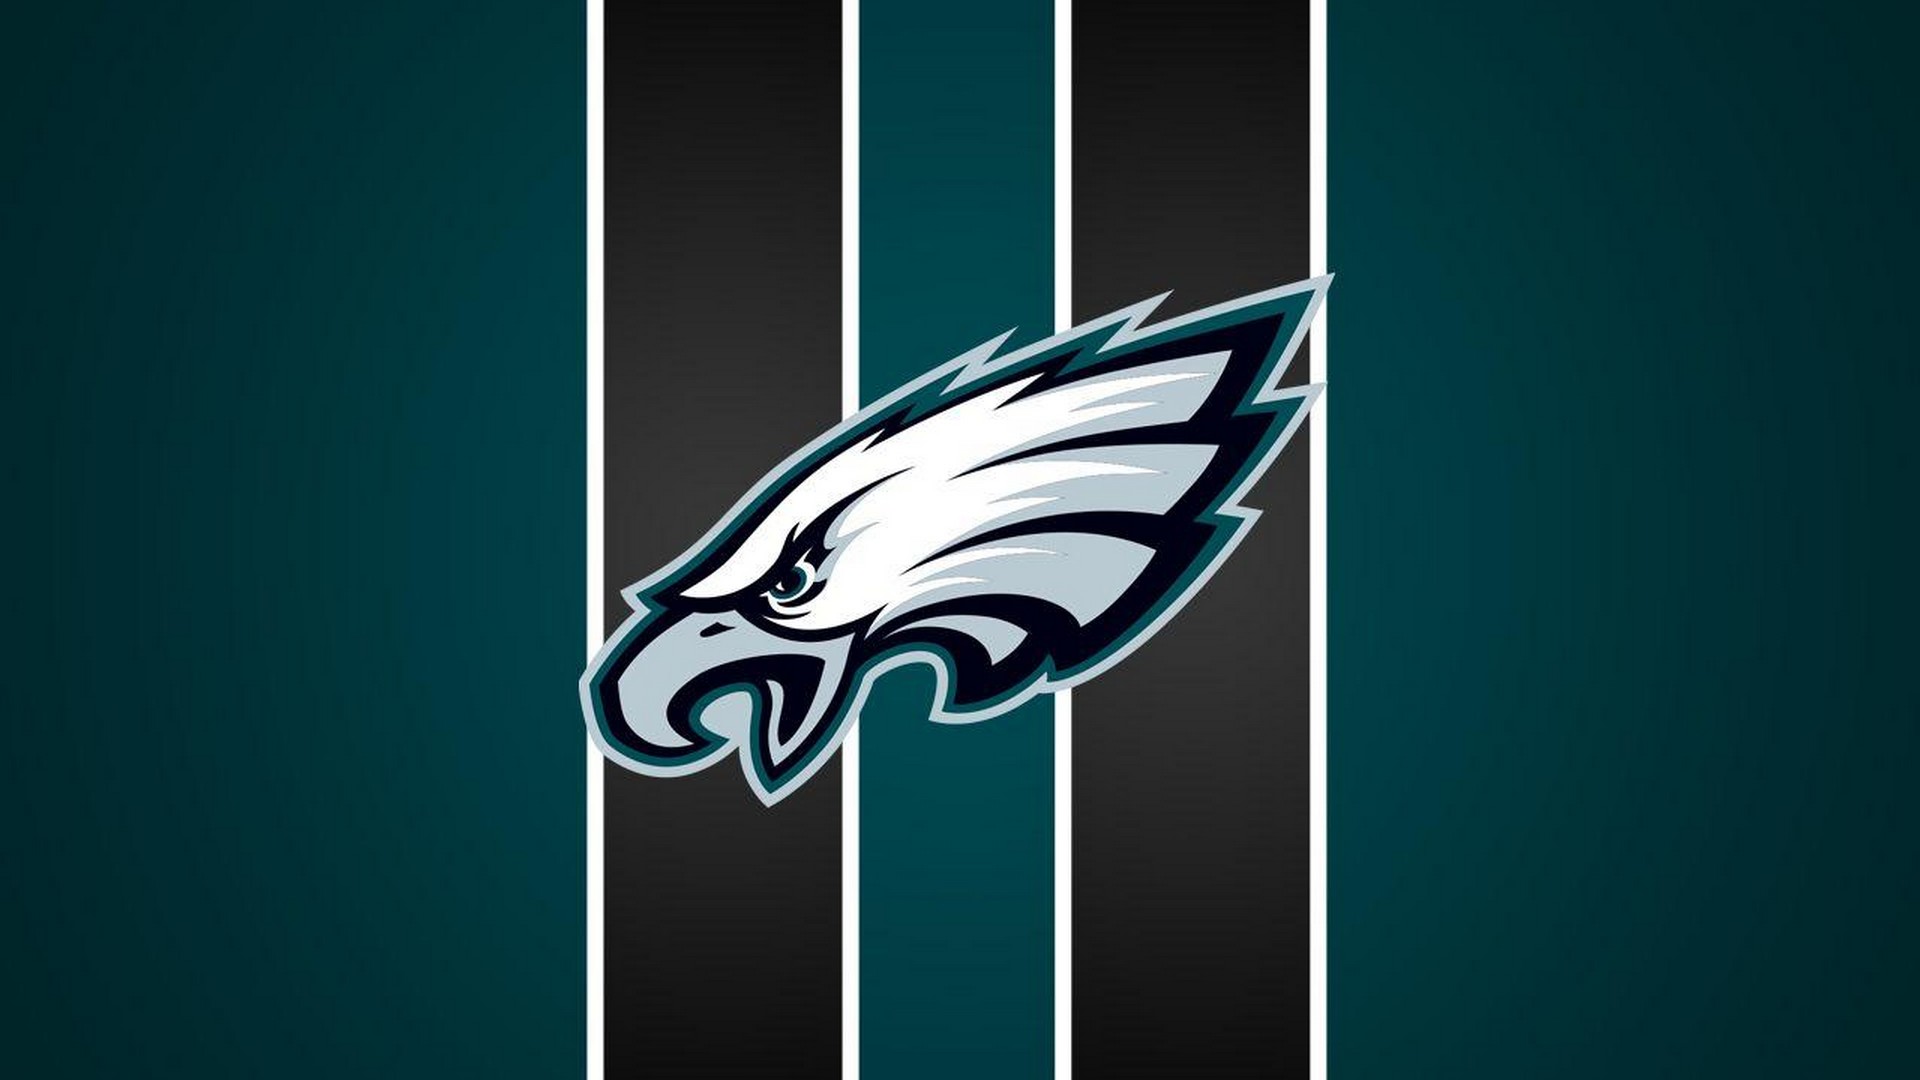 Wallpapers Eagles with resolution 1920x1080 pixel. You can make this wallpaper for your Mac or Windows Desktop Background, iPhone, Android or Tablet and another Smartphone device